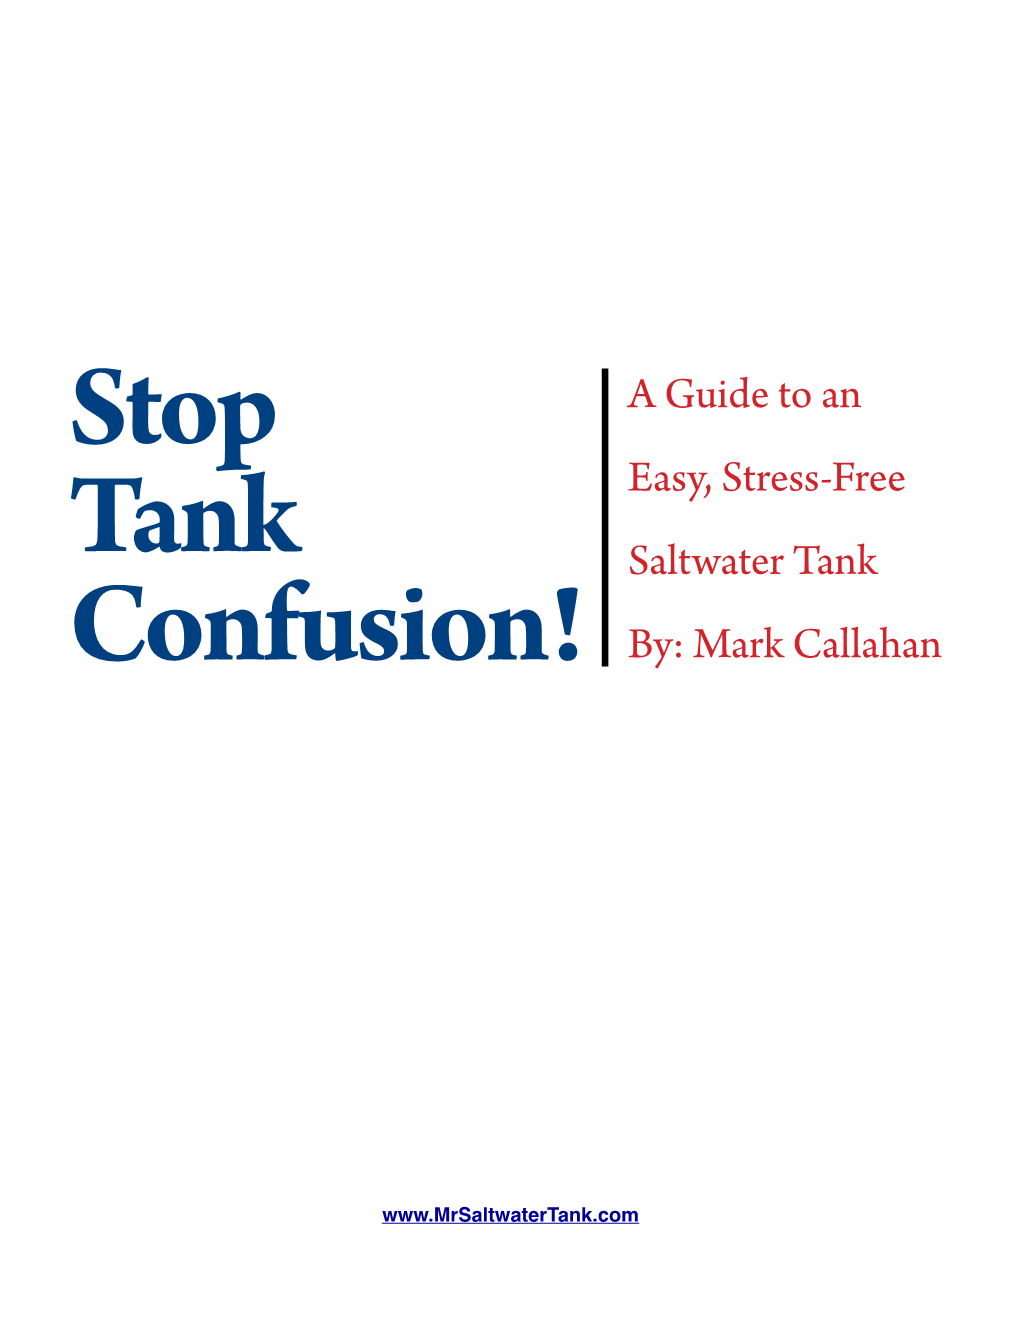 A Guide to an Easy, Stress-Free Saltwater Tank By: Mark Callahan